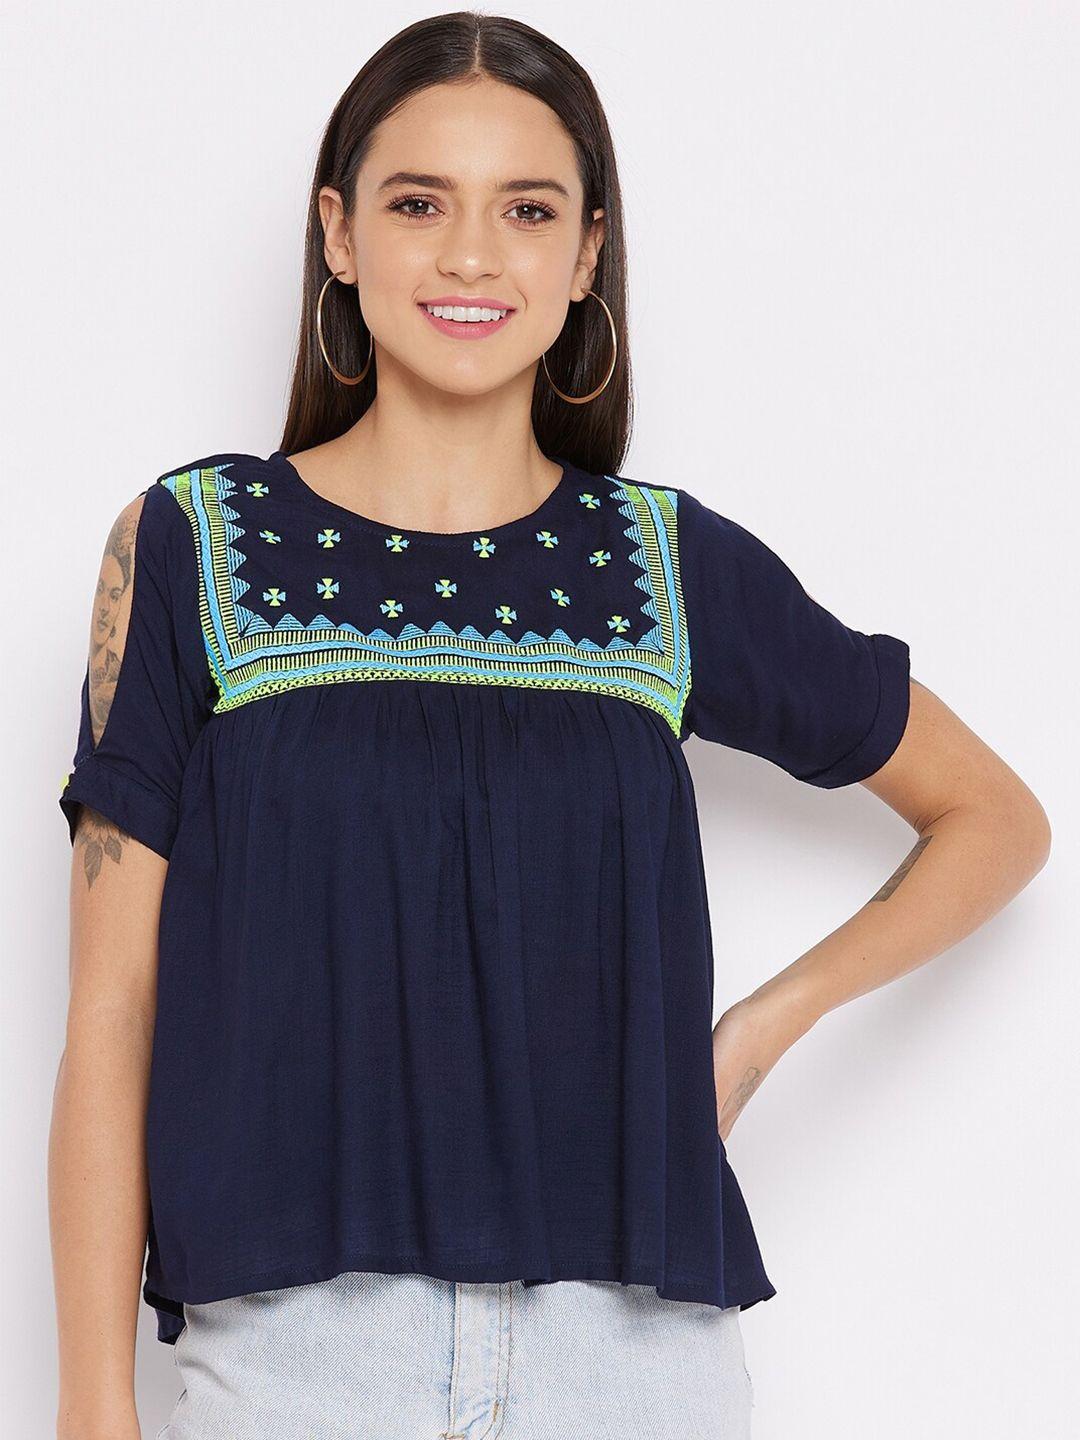 winered-women-navy-blue-rayon-embroidered-yoke-a-line-top